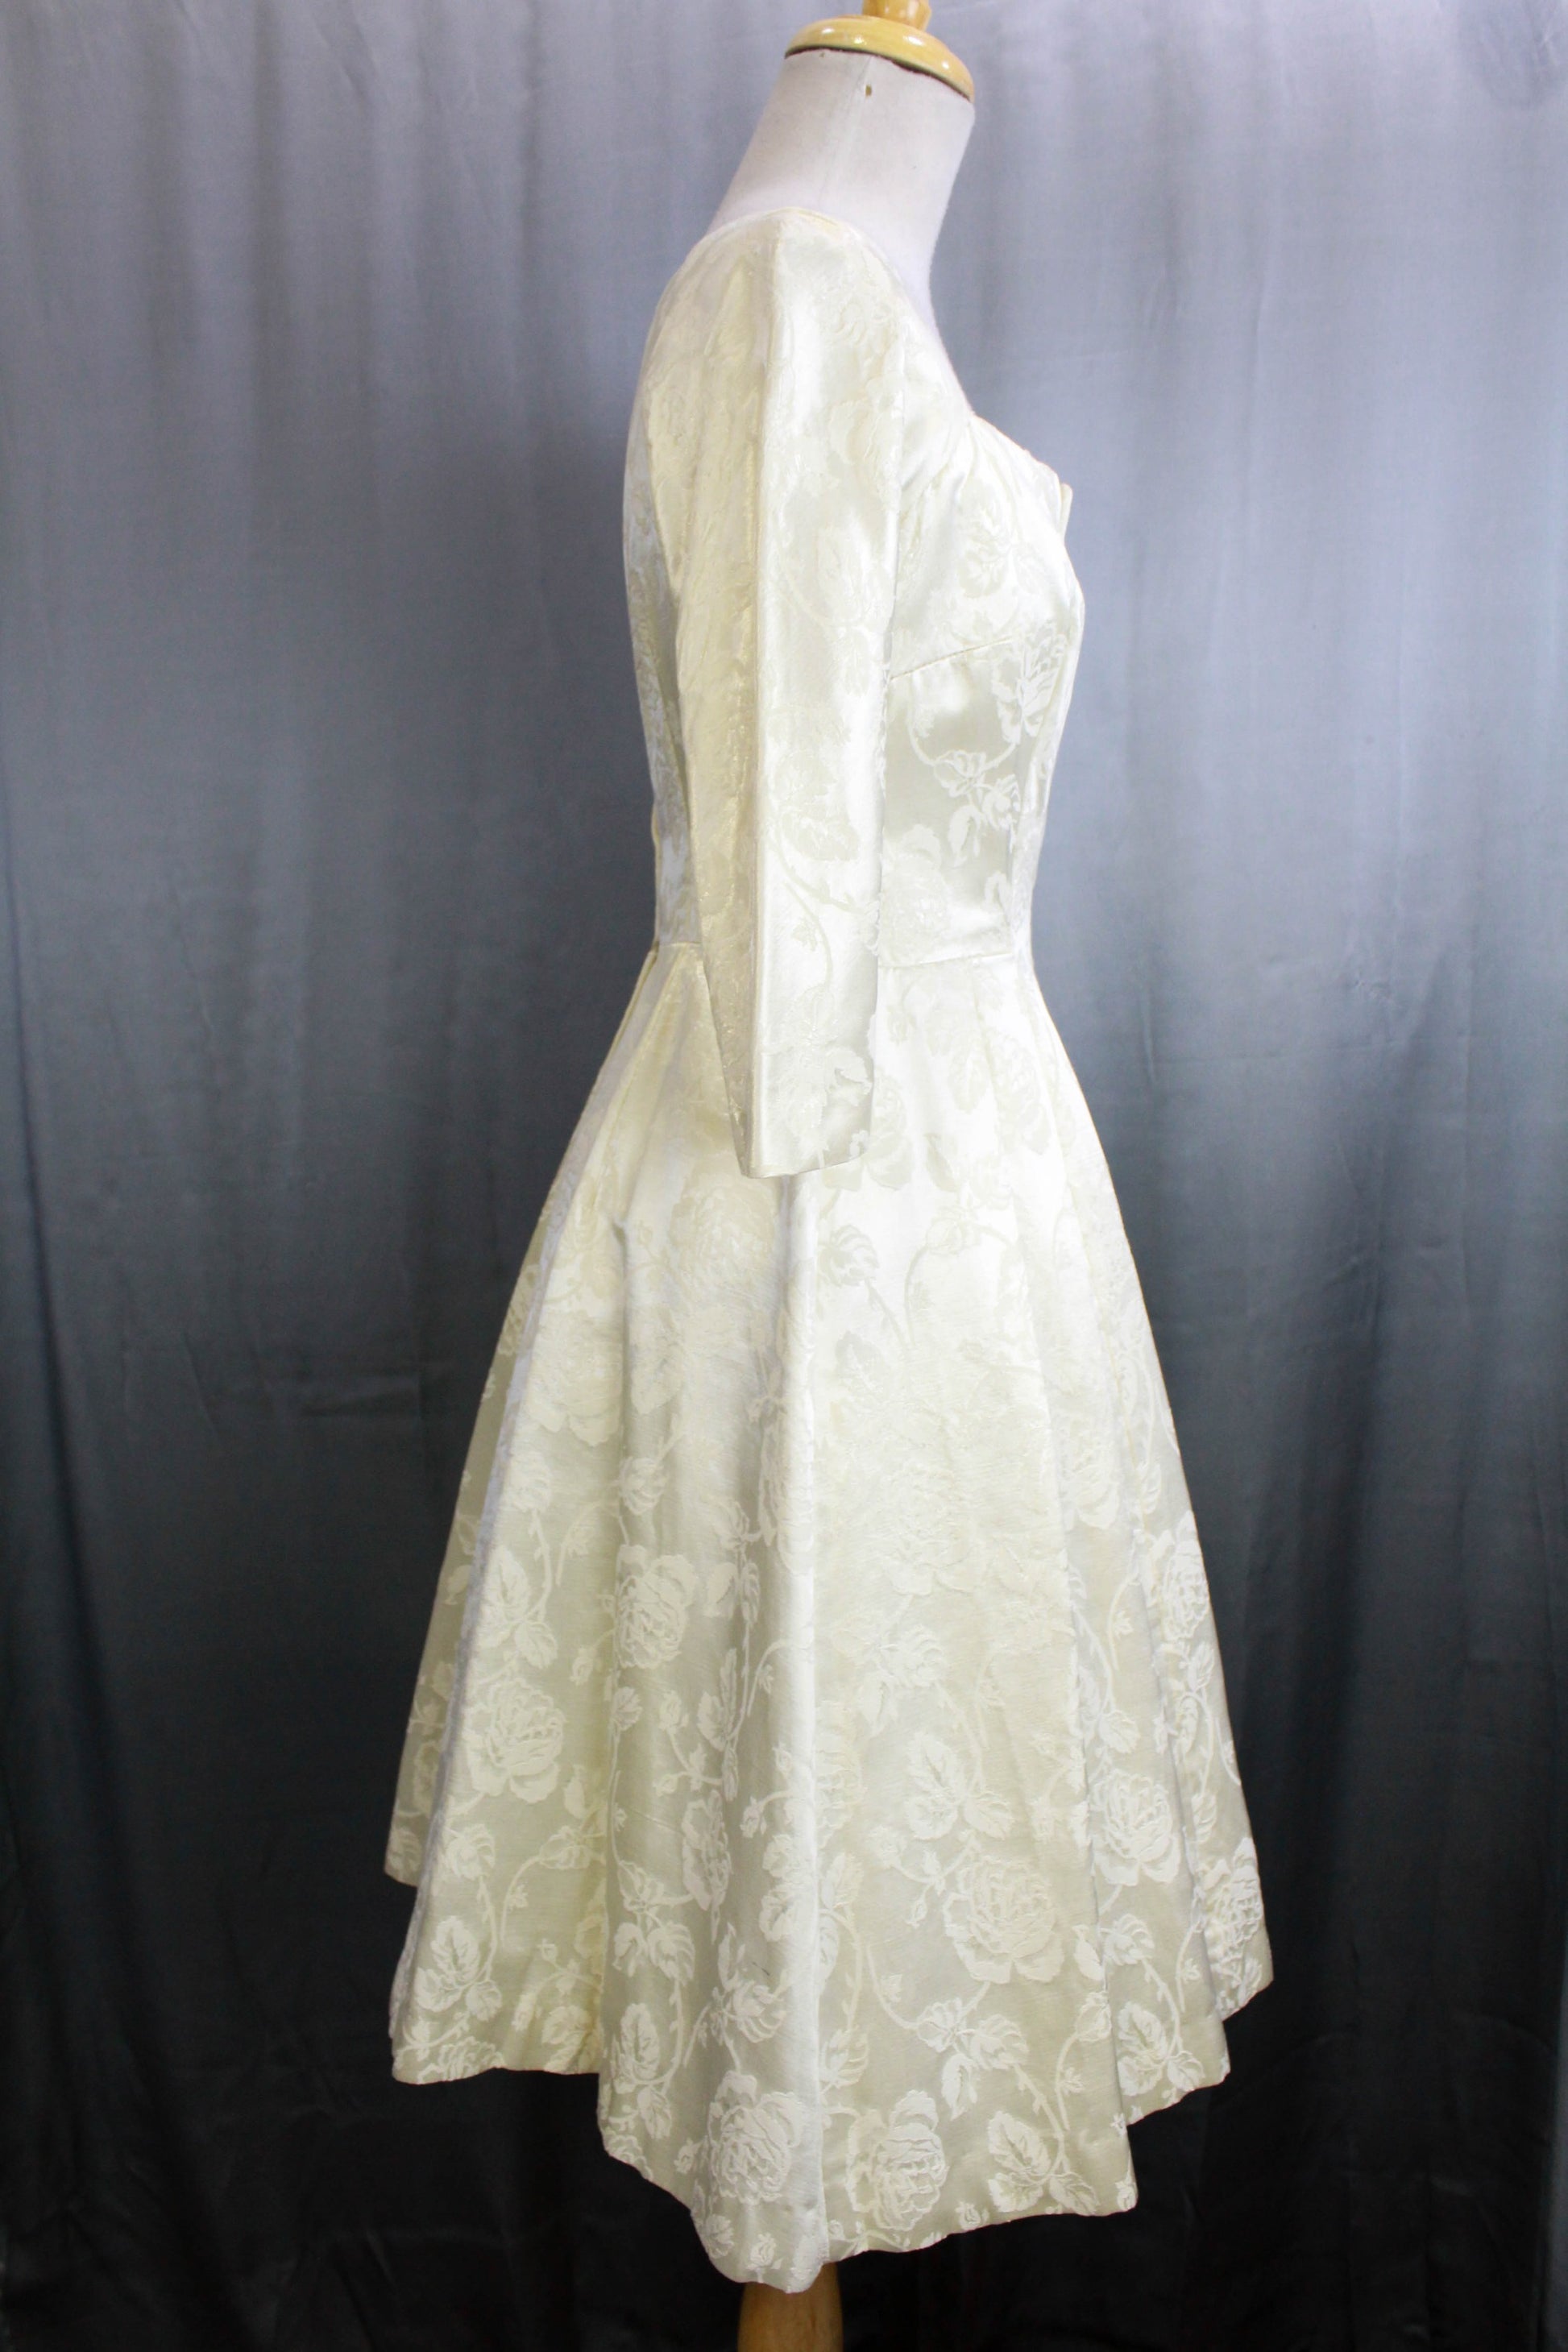 1950s bridal dress, white brocade satin with 3/4 sleeves and fit and flare silhouette